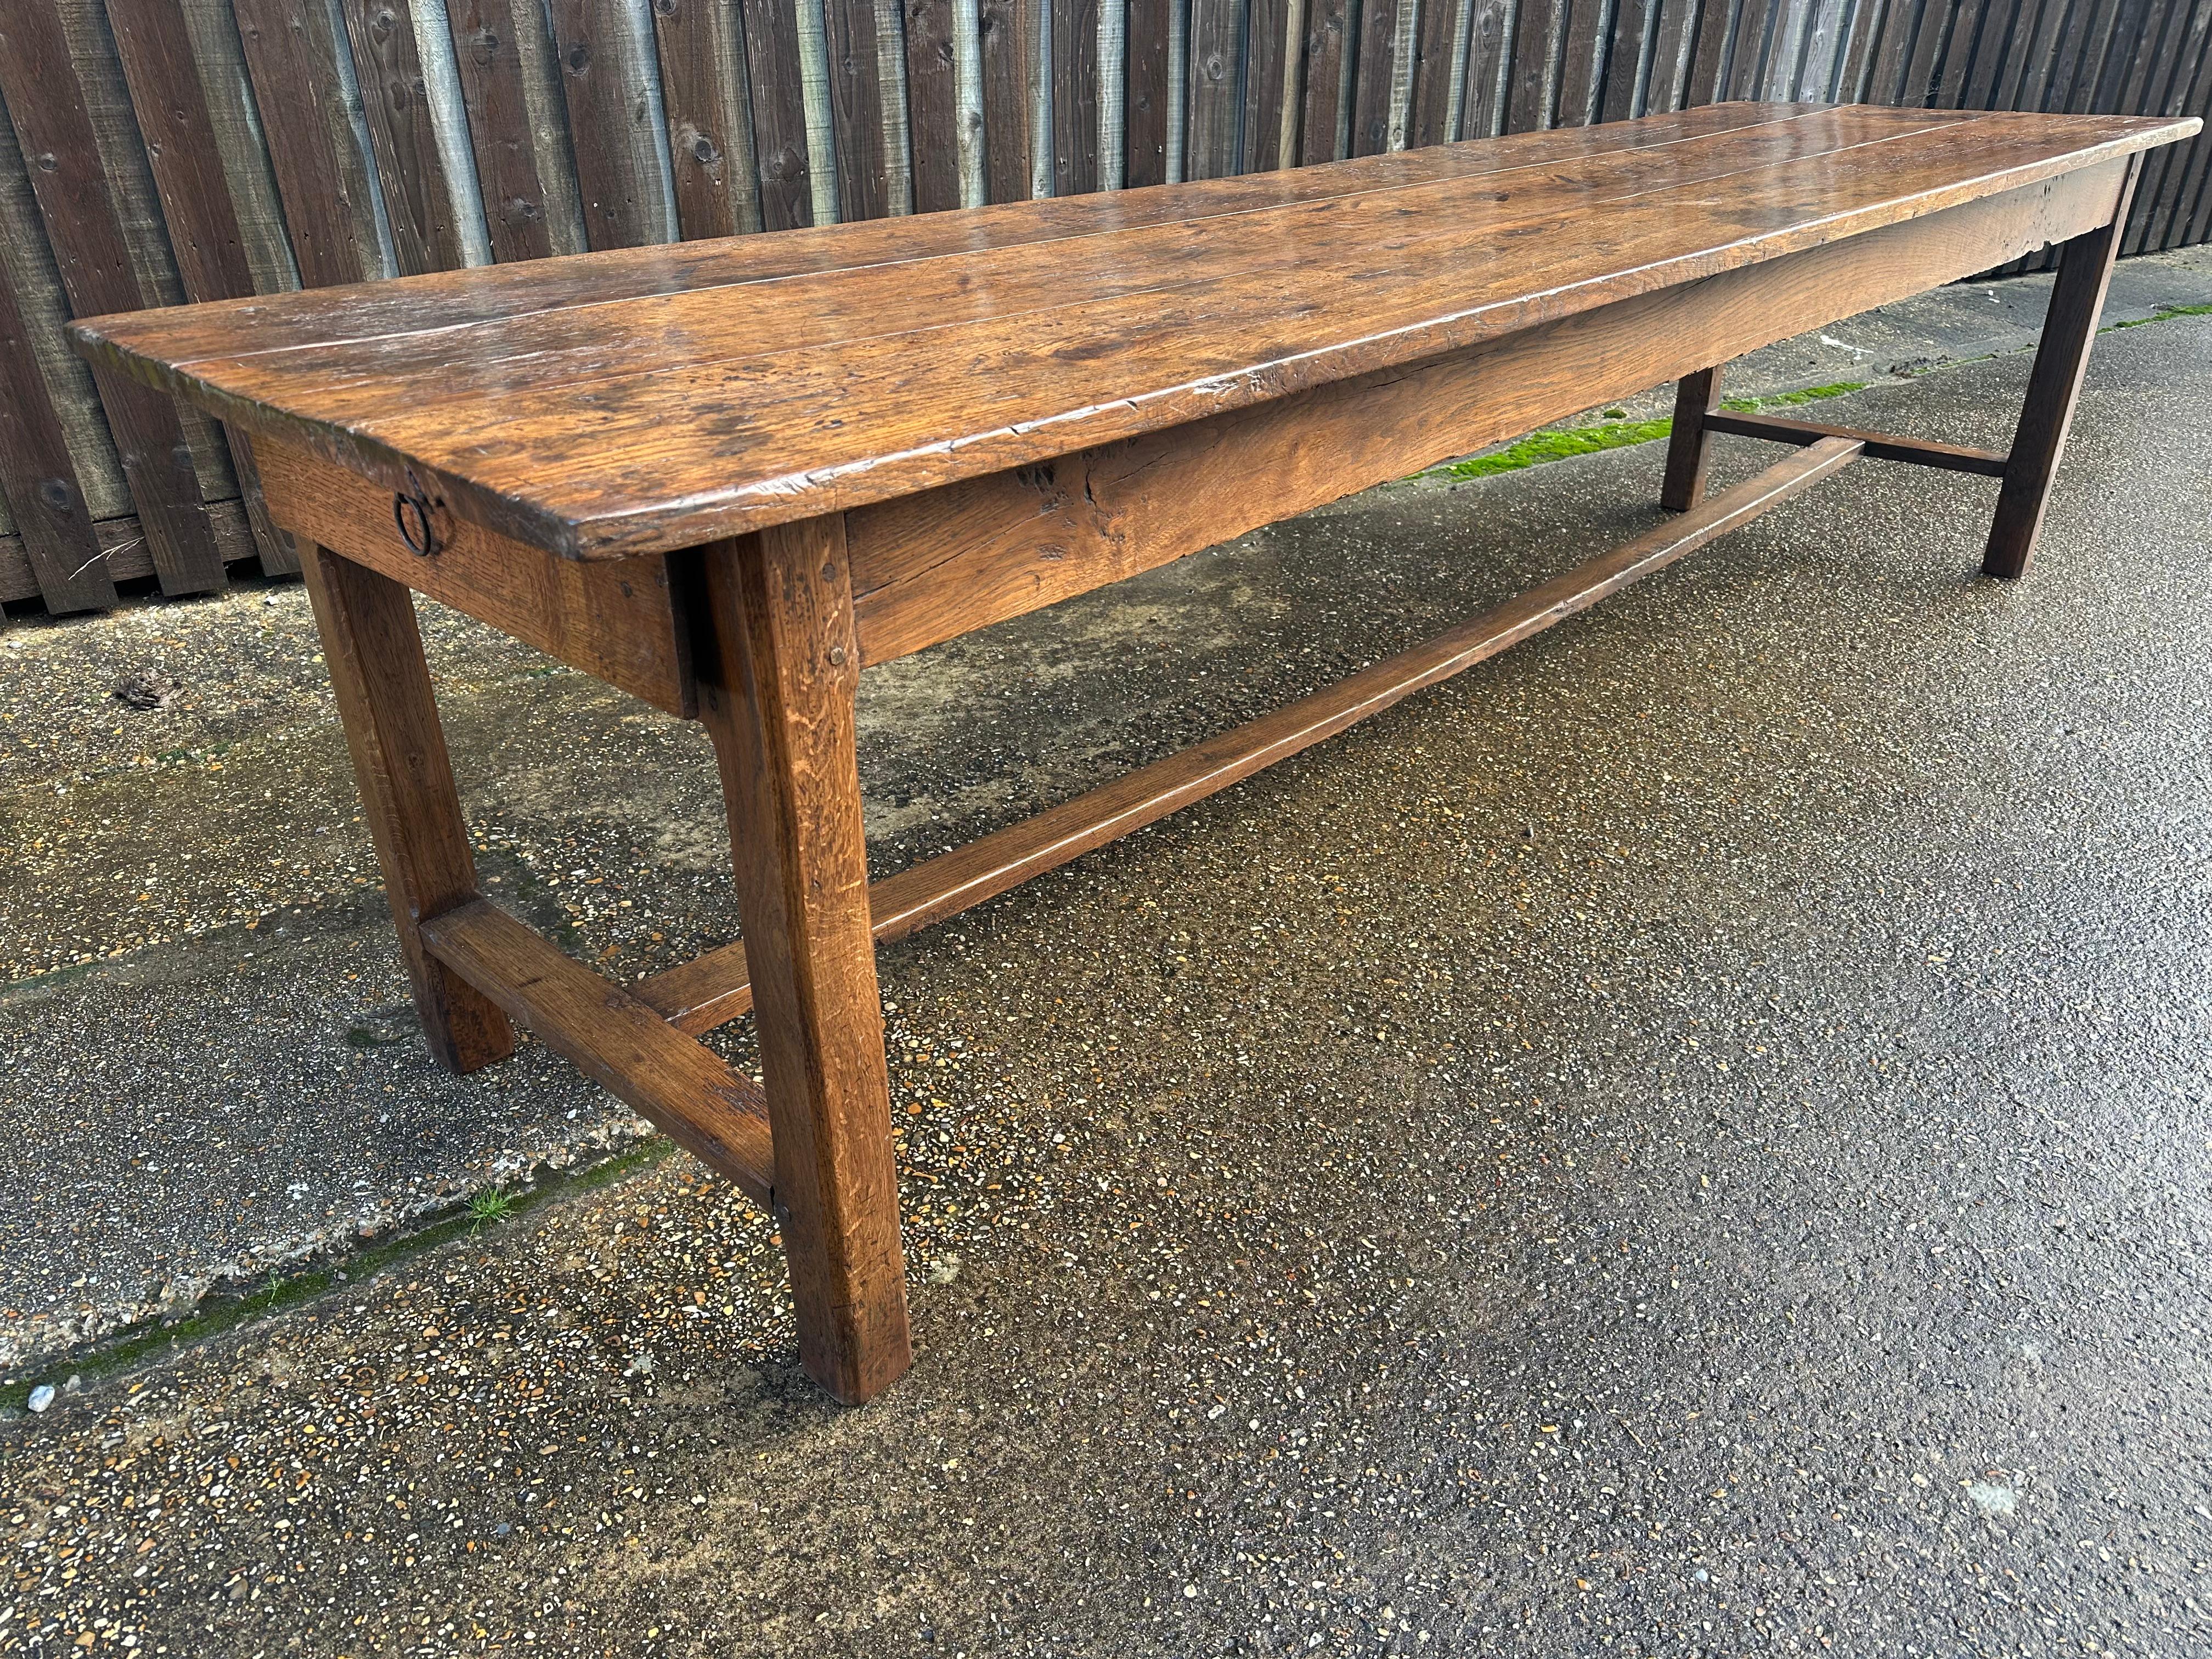 8th Century large oak farmhouse dining table with one drawer on the end. This 18th century large farmhouse dining table is a remarkable antique piece with exquisite craftsmanship. It features a three plank top, showcasing the natural beauty of the